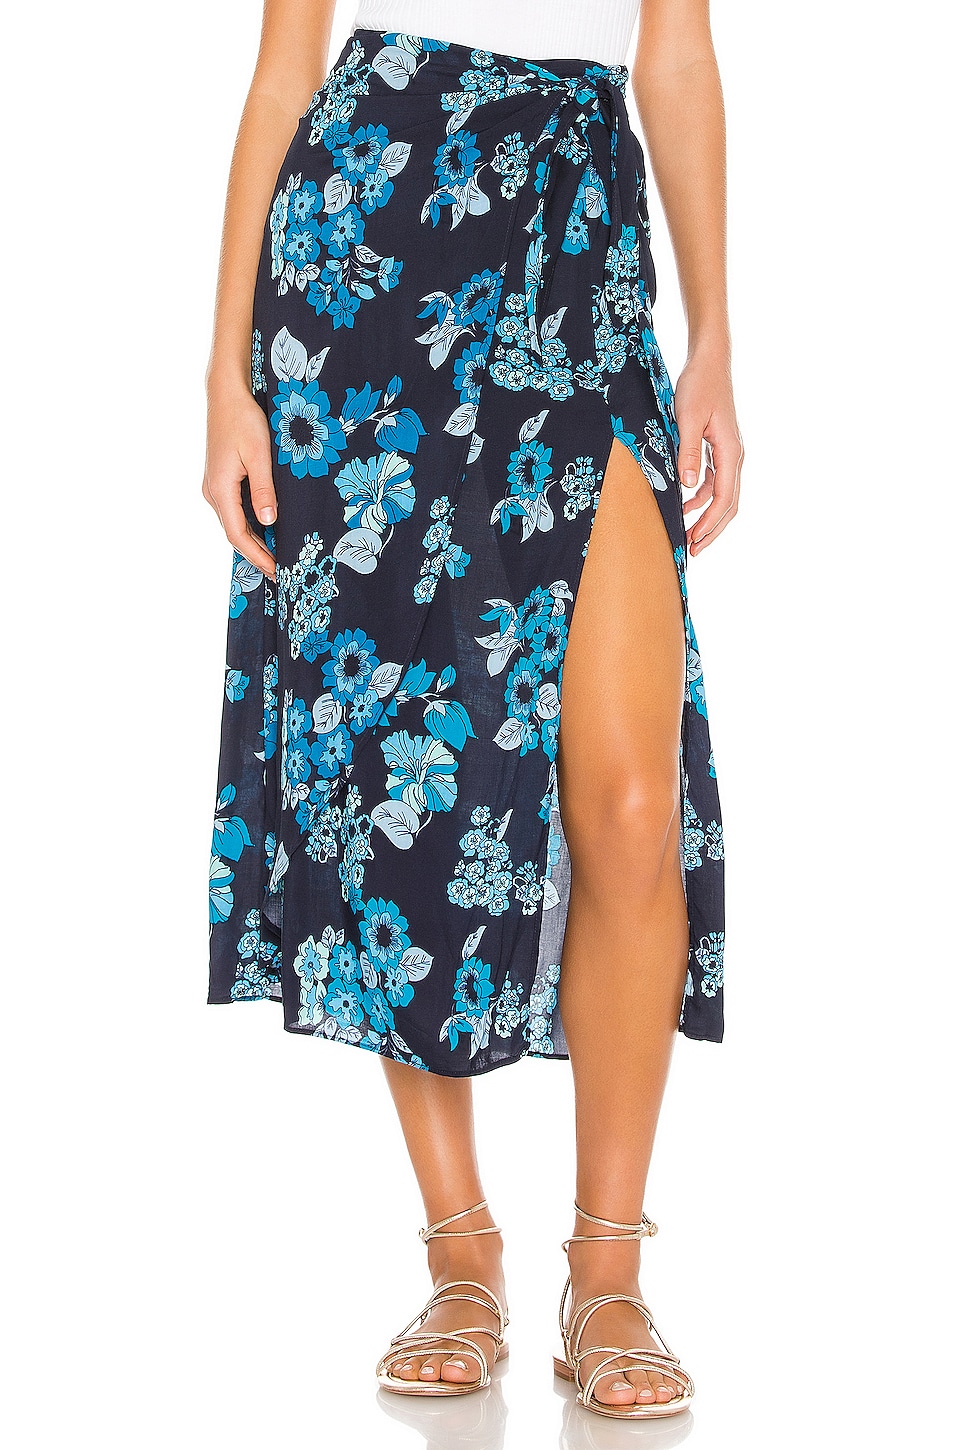 Free People Sunray Sarong Skirt in Blue 